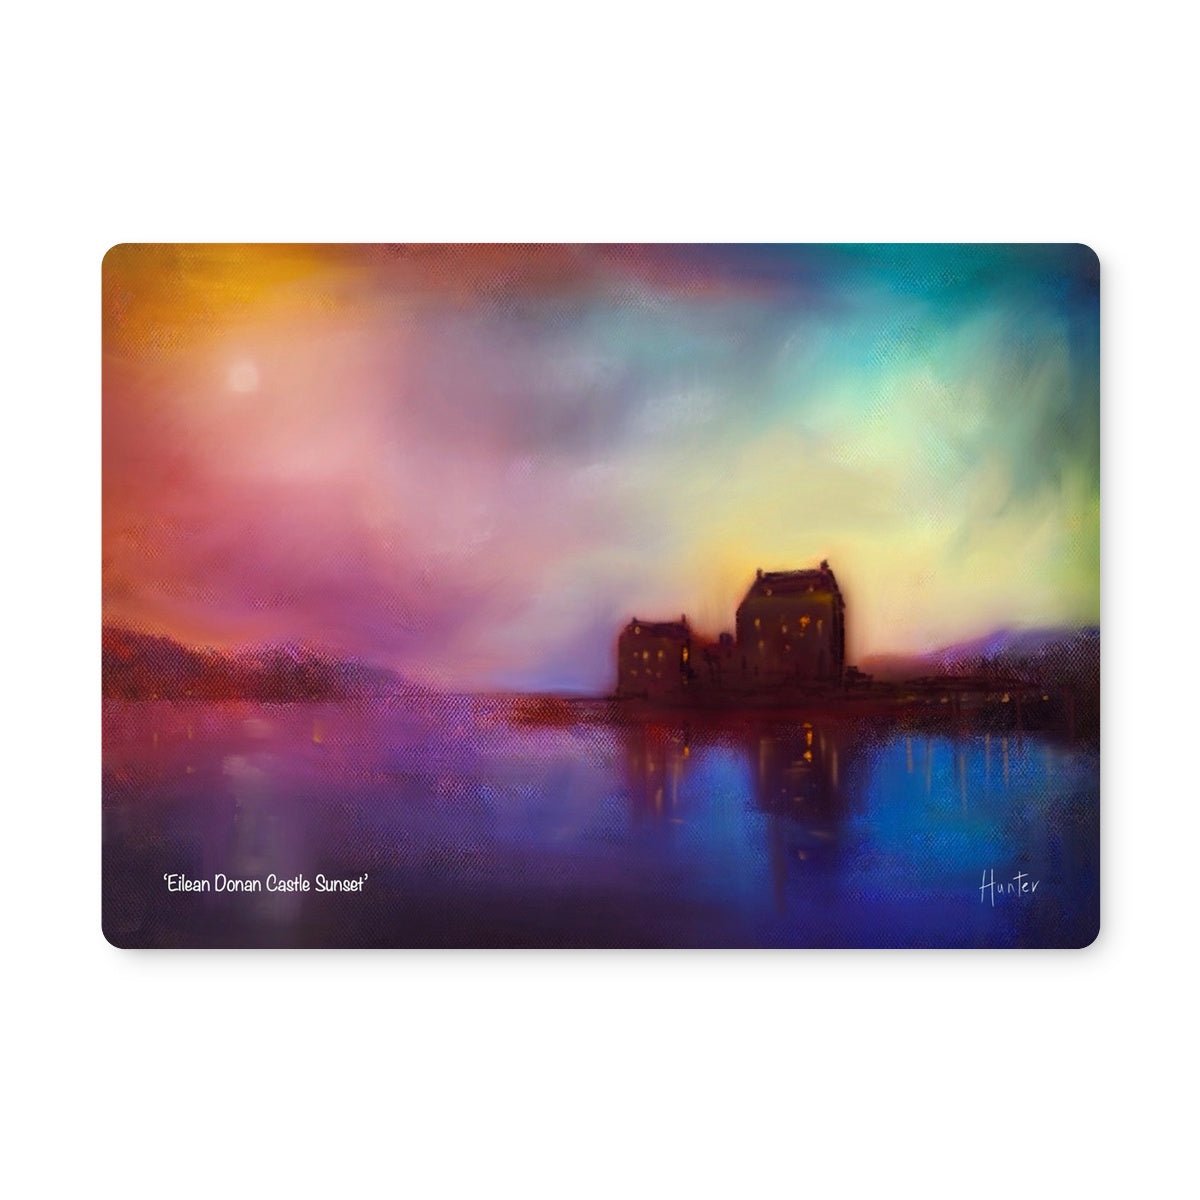 Eilean Donan Castle Sunset Art Gifts Placemat-Placemats-Scottish Castles Art Gallery-4 Placemats-Paintings, Prints, Homeware, Art Gifts From Scotland By Scottish Artist Kevin Hunter